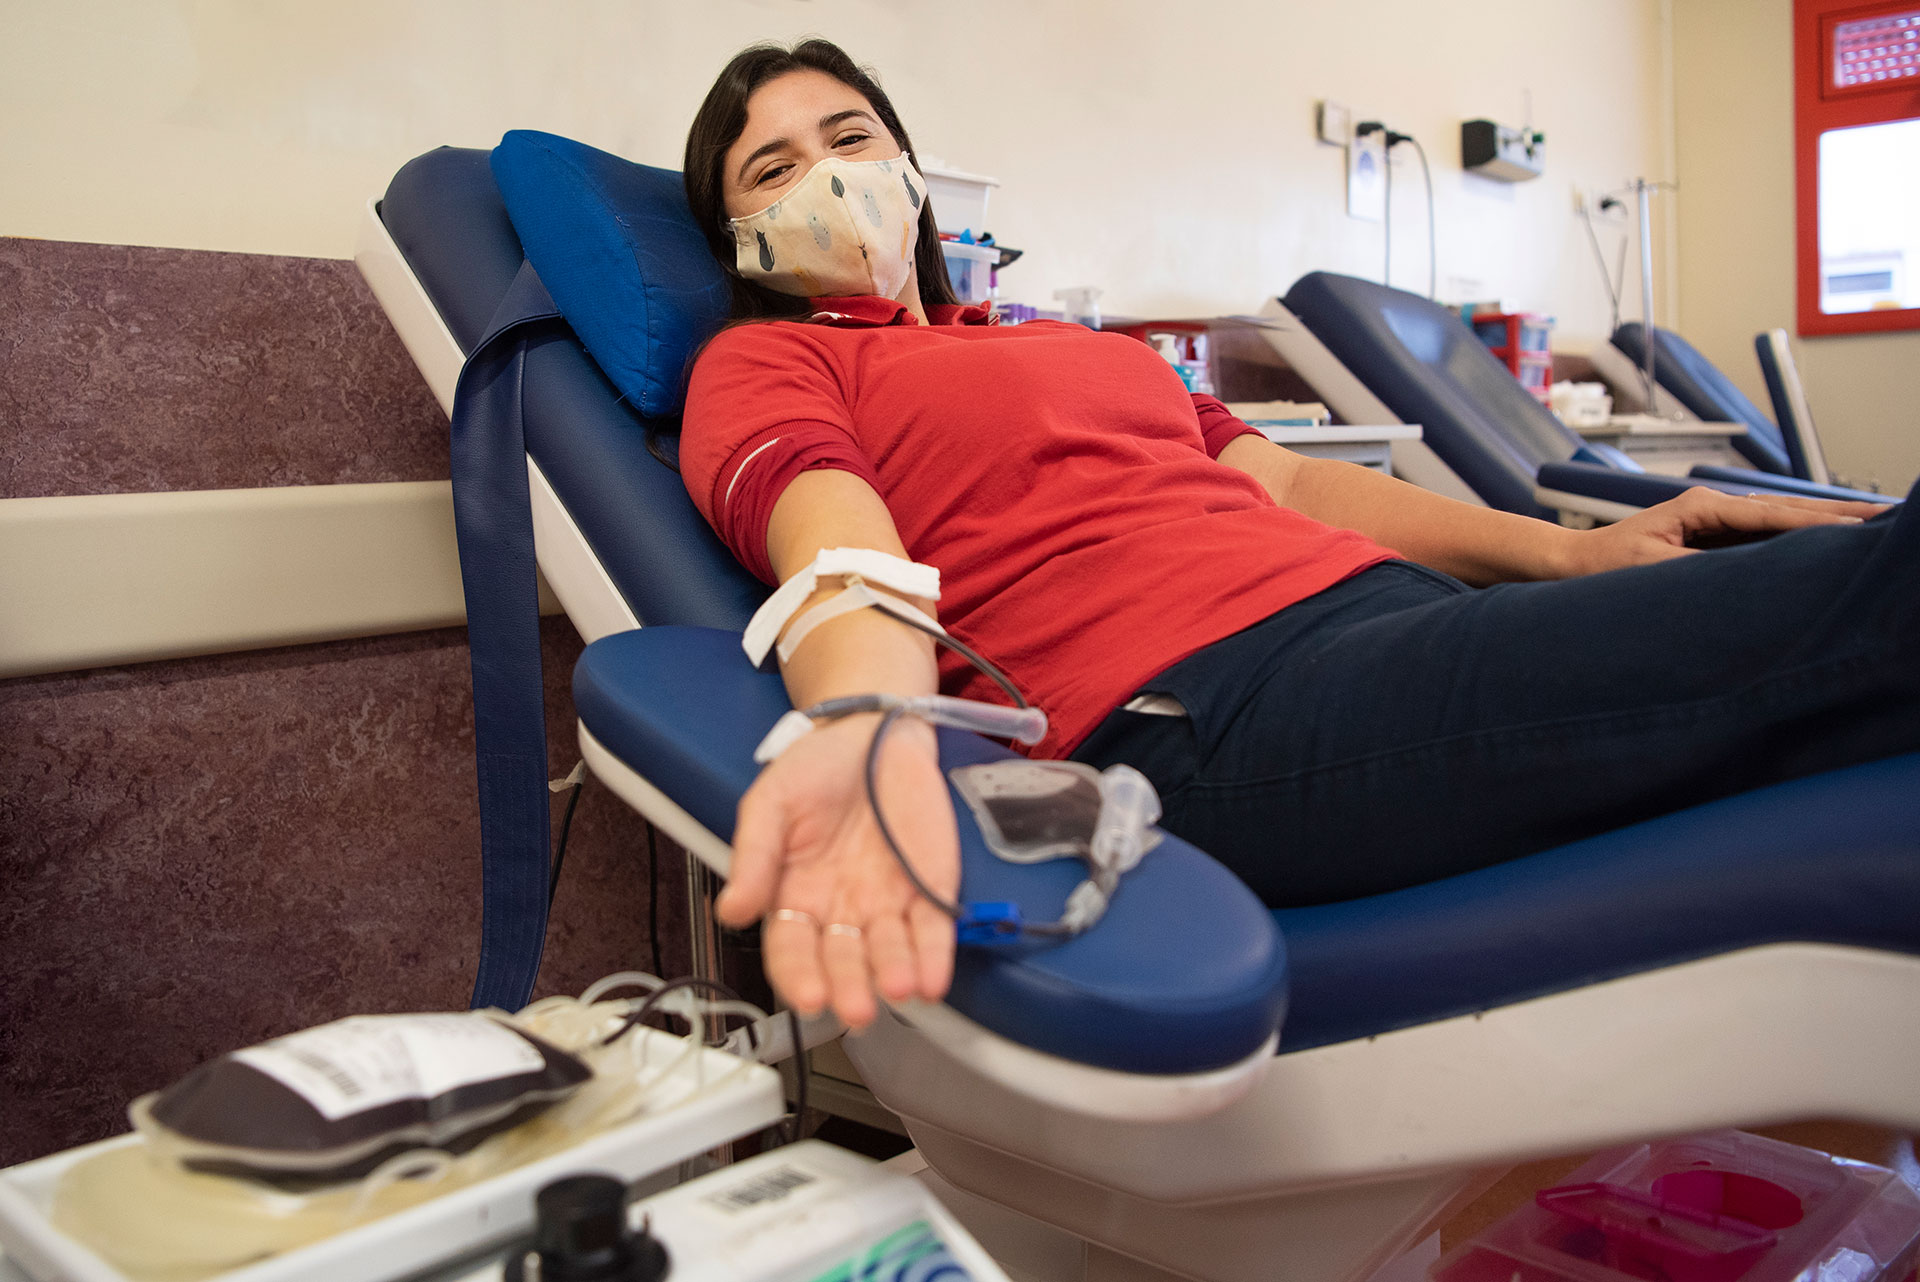 Open for holidays, it is the campaign promoted by the Garrahan Hospital that seeks blood donors during the summer, when donations drop sharply (Garrahan Hospital)